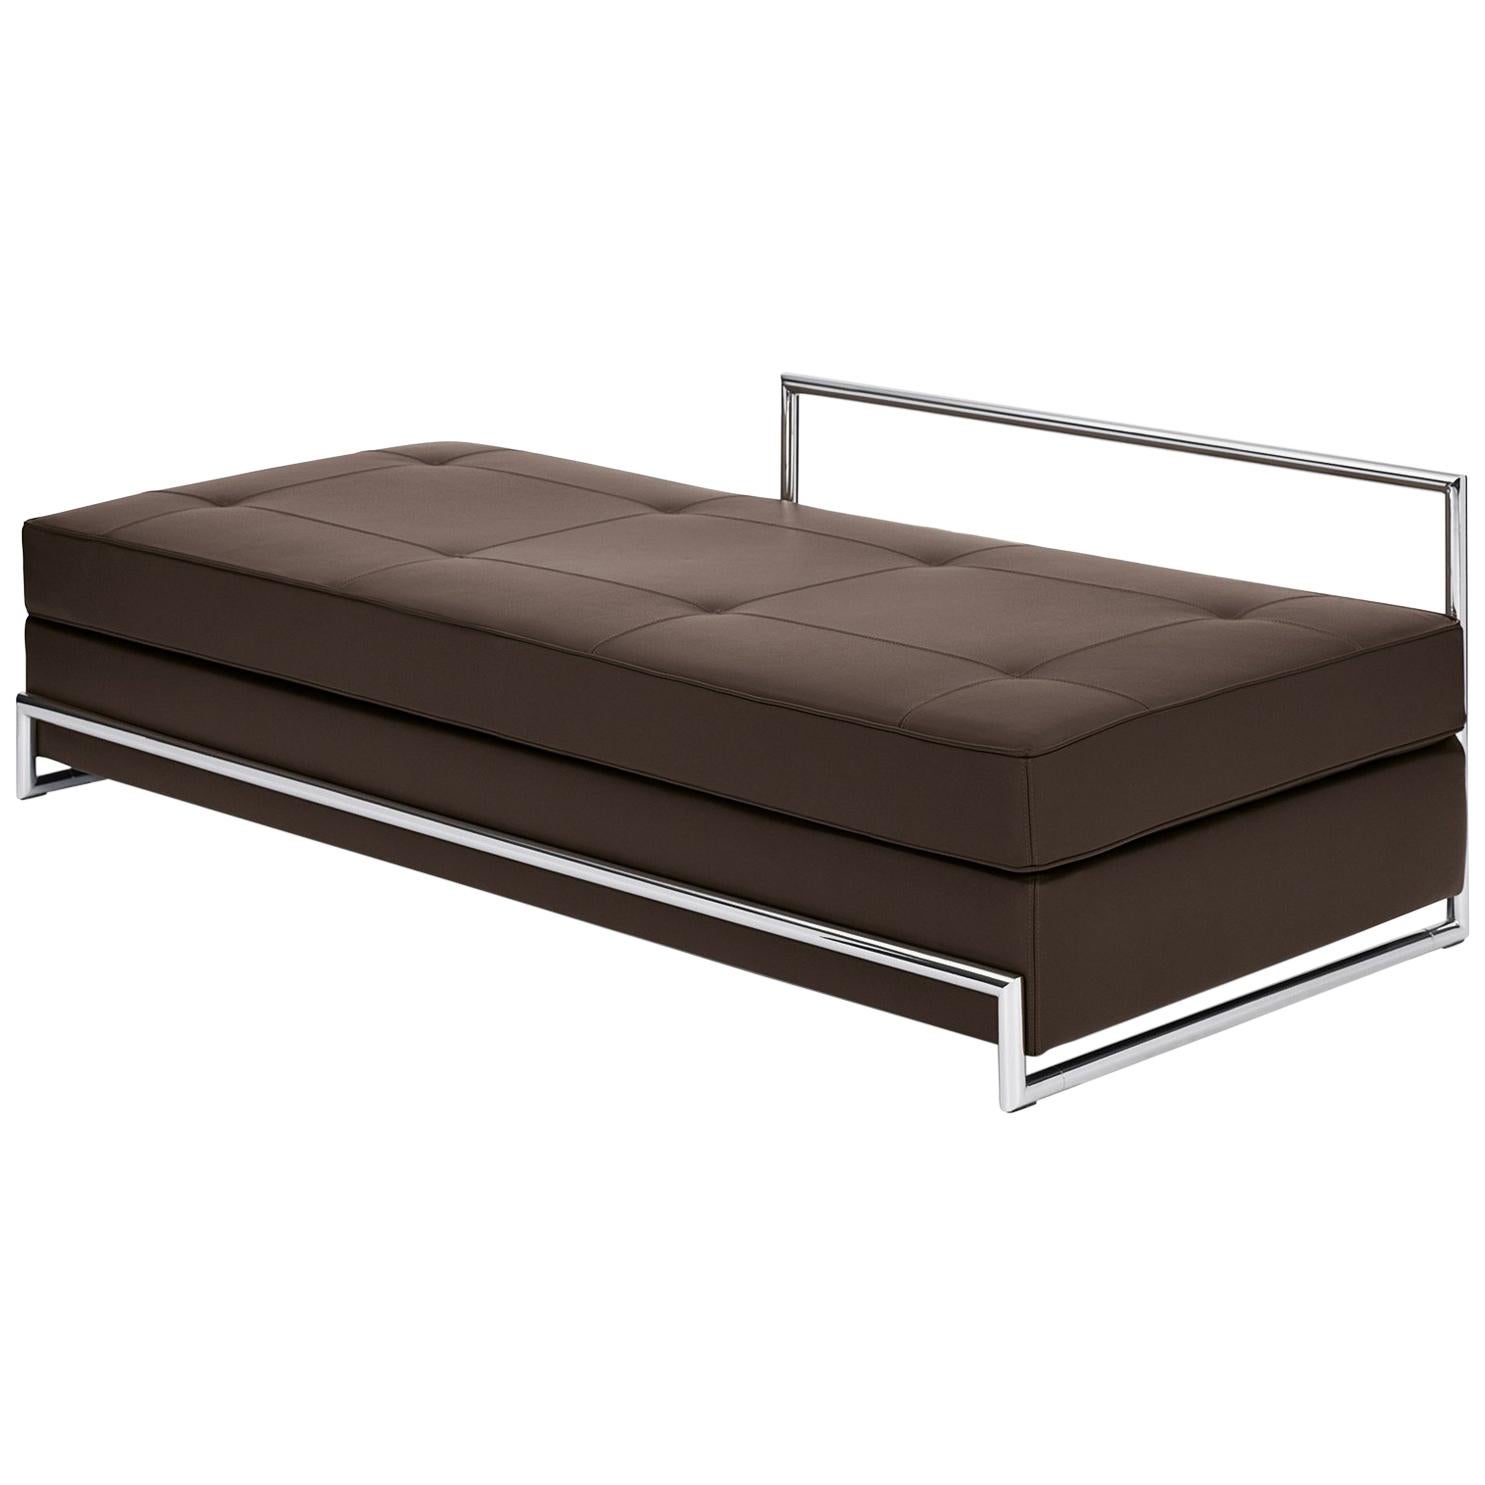 Customizable ClassiCon Daybed  by Eileen Gray